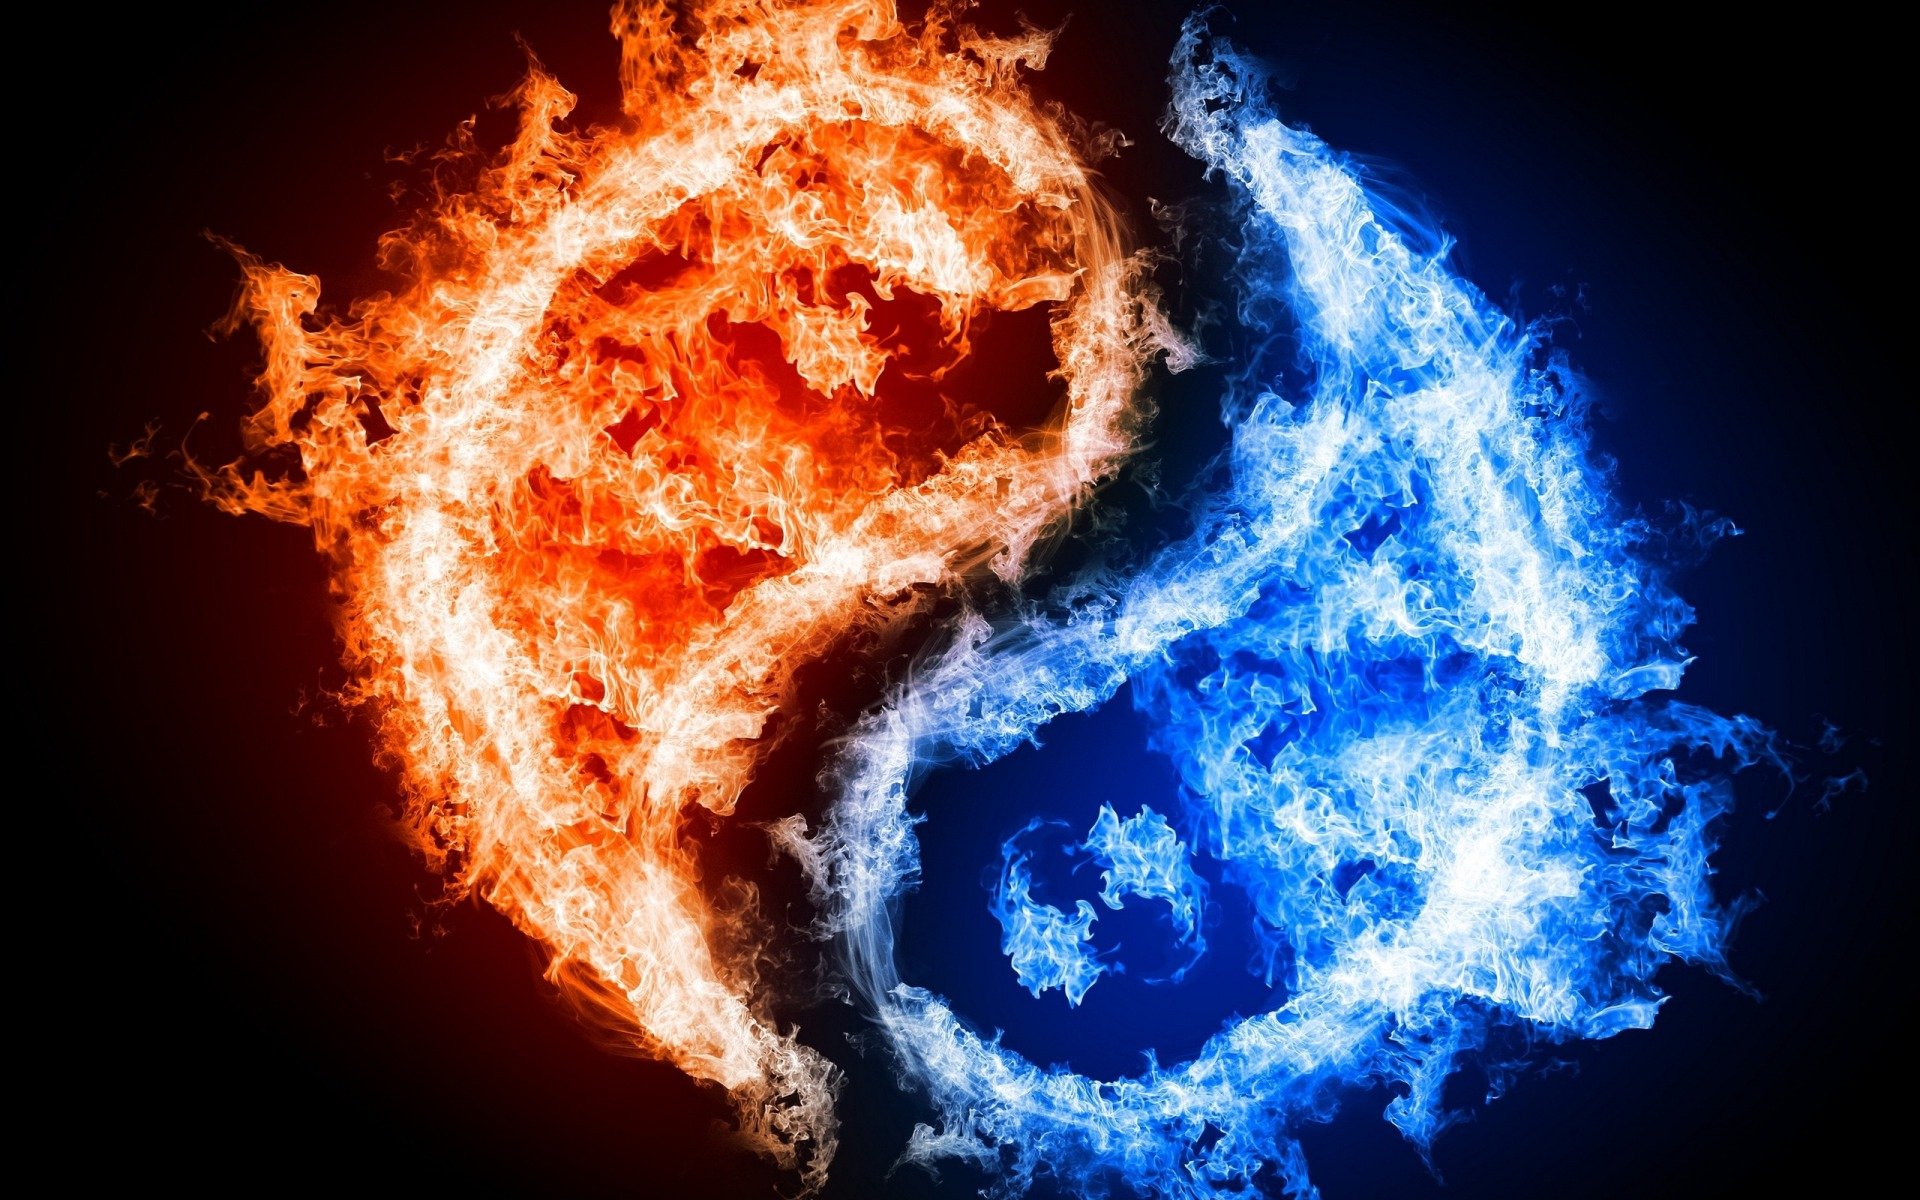 Blue and Red Fire Wallpaper wallpaper Blue and Red Fire Wallpaper hd 1920x1200